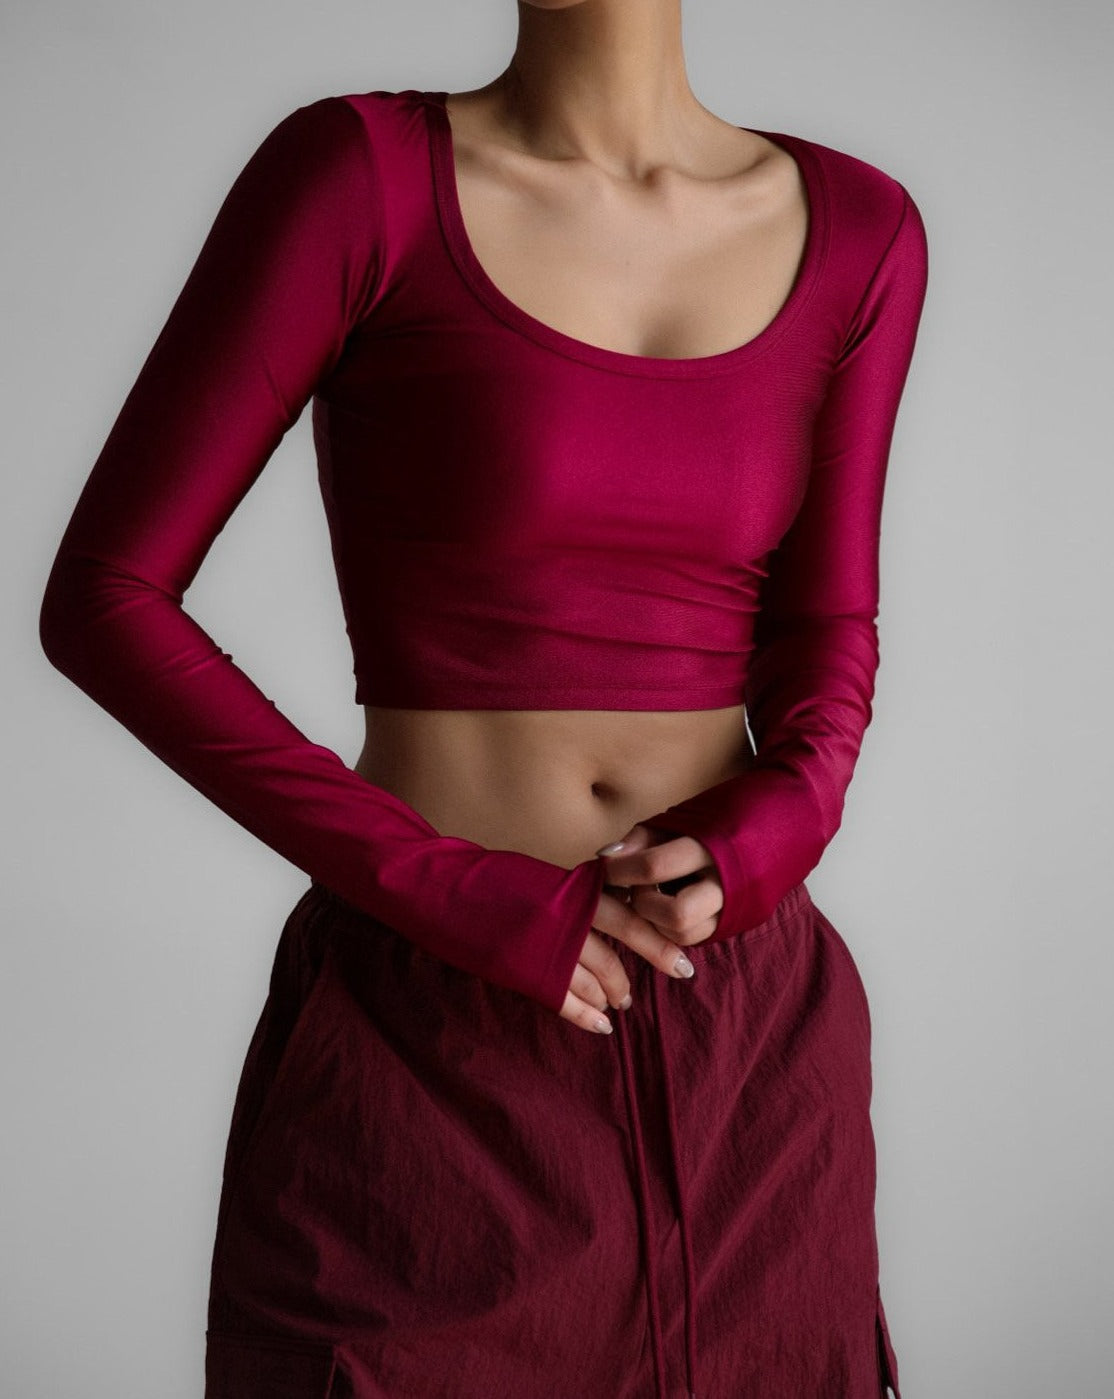 【PAPERMOON 페이퍼 문】SS / Shiny Long Sleeved U - Neck Cropped Top